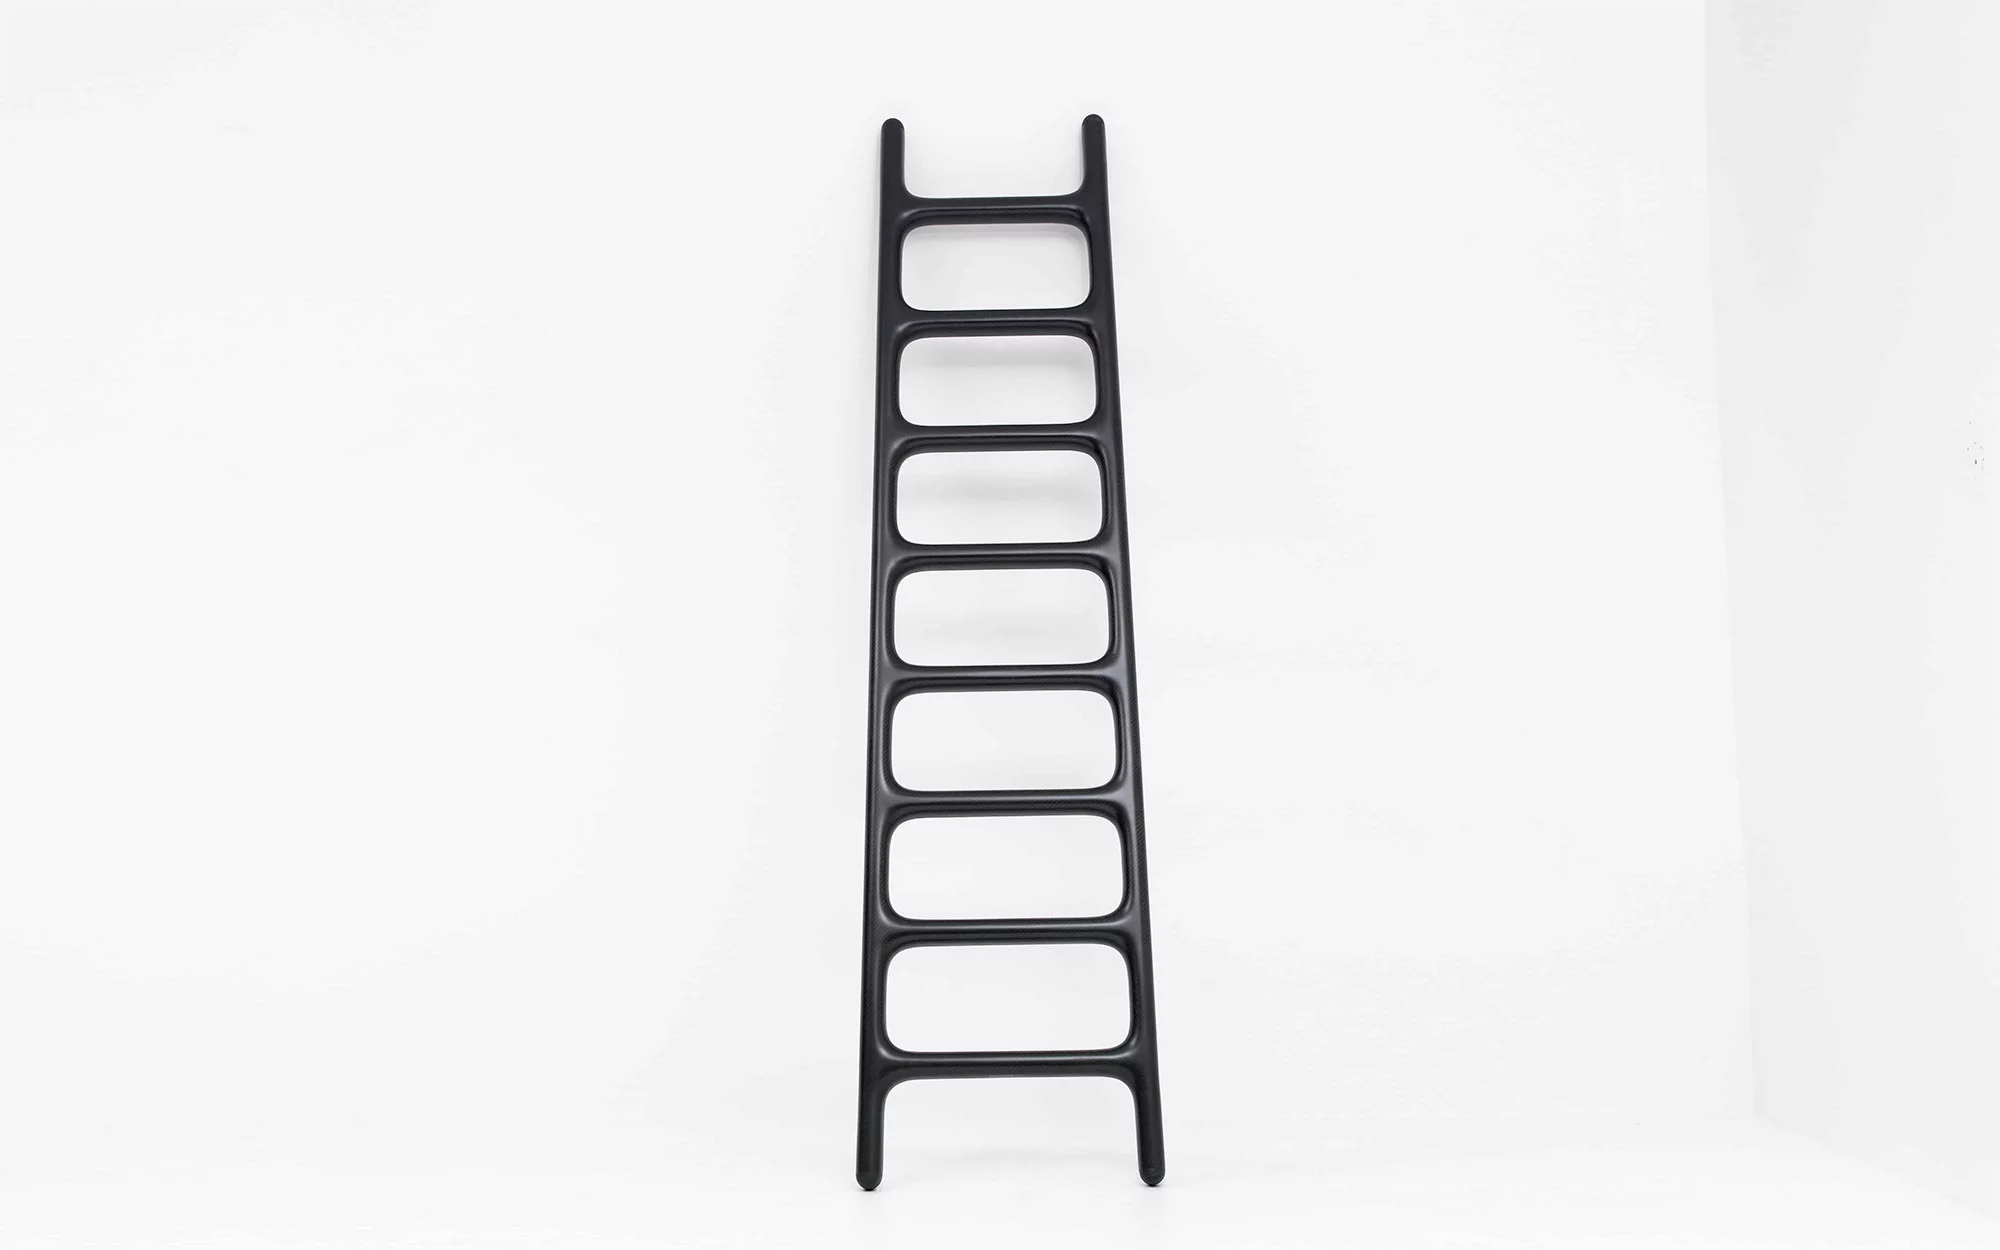 Carbon Ladder - Marc Newson - step by step.